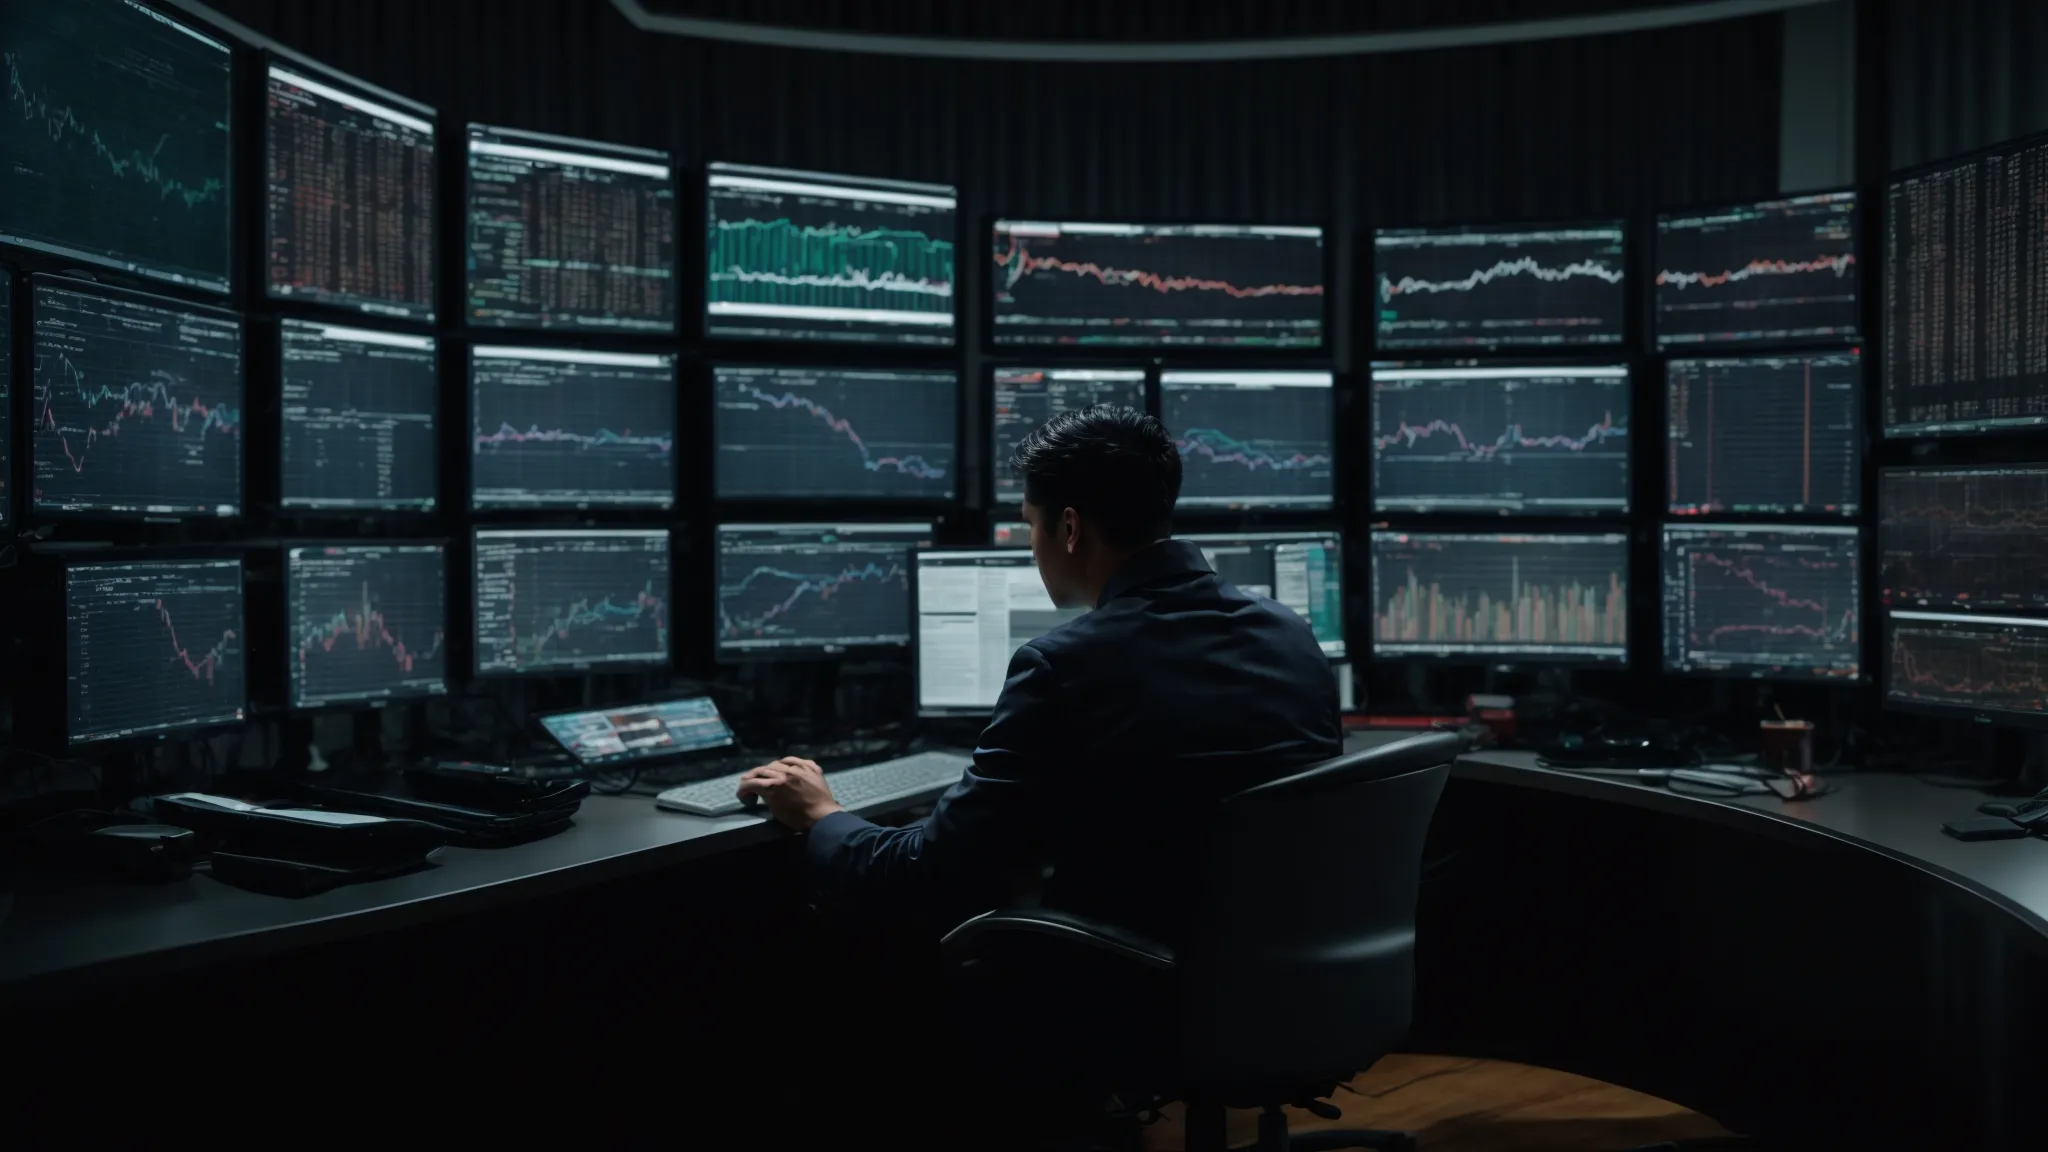 an analyst scrutinizes data on multiple computer screens, highlighting the need for precision in metric analysis.